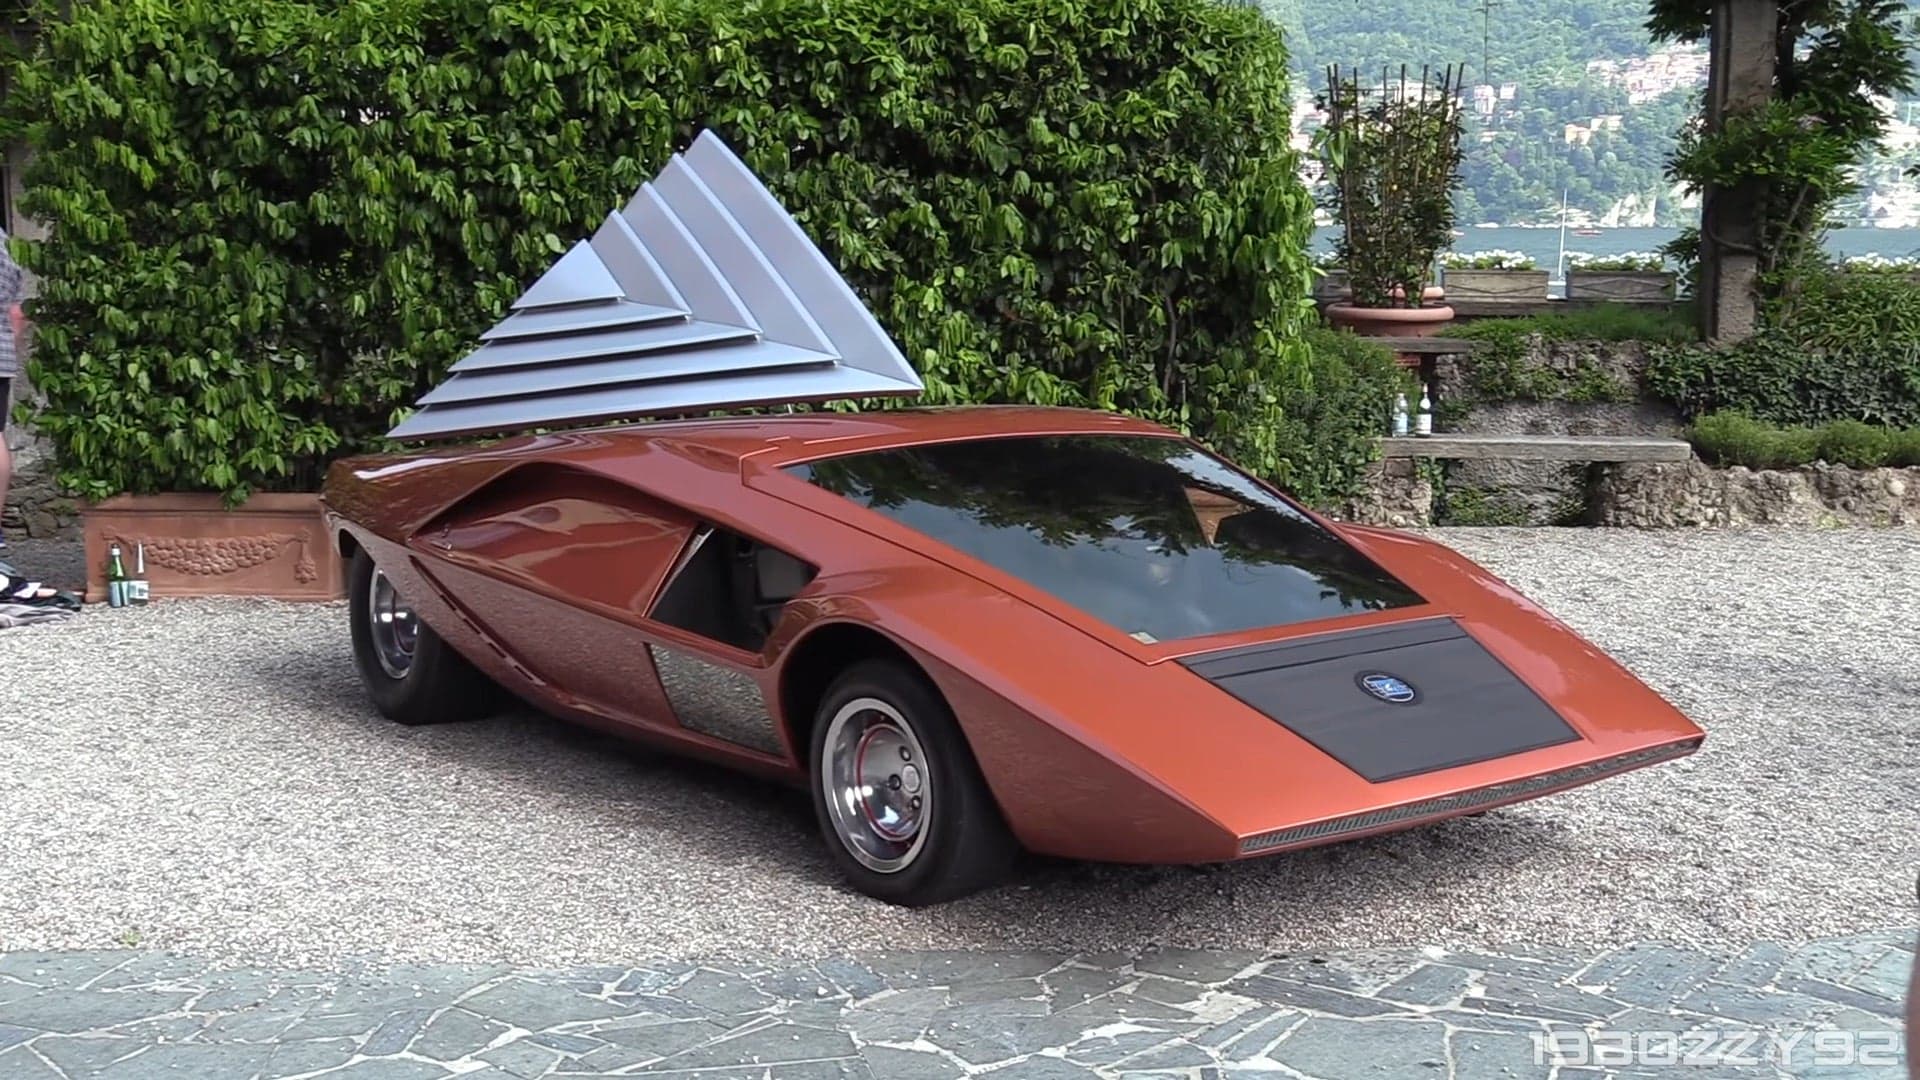 Watch the Wedge-Shaped Lancia Stratos HF Zero Concept in Action